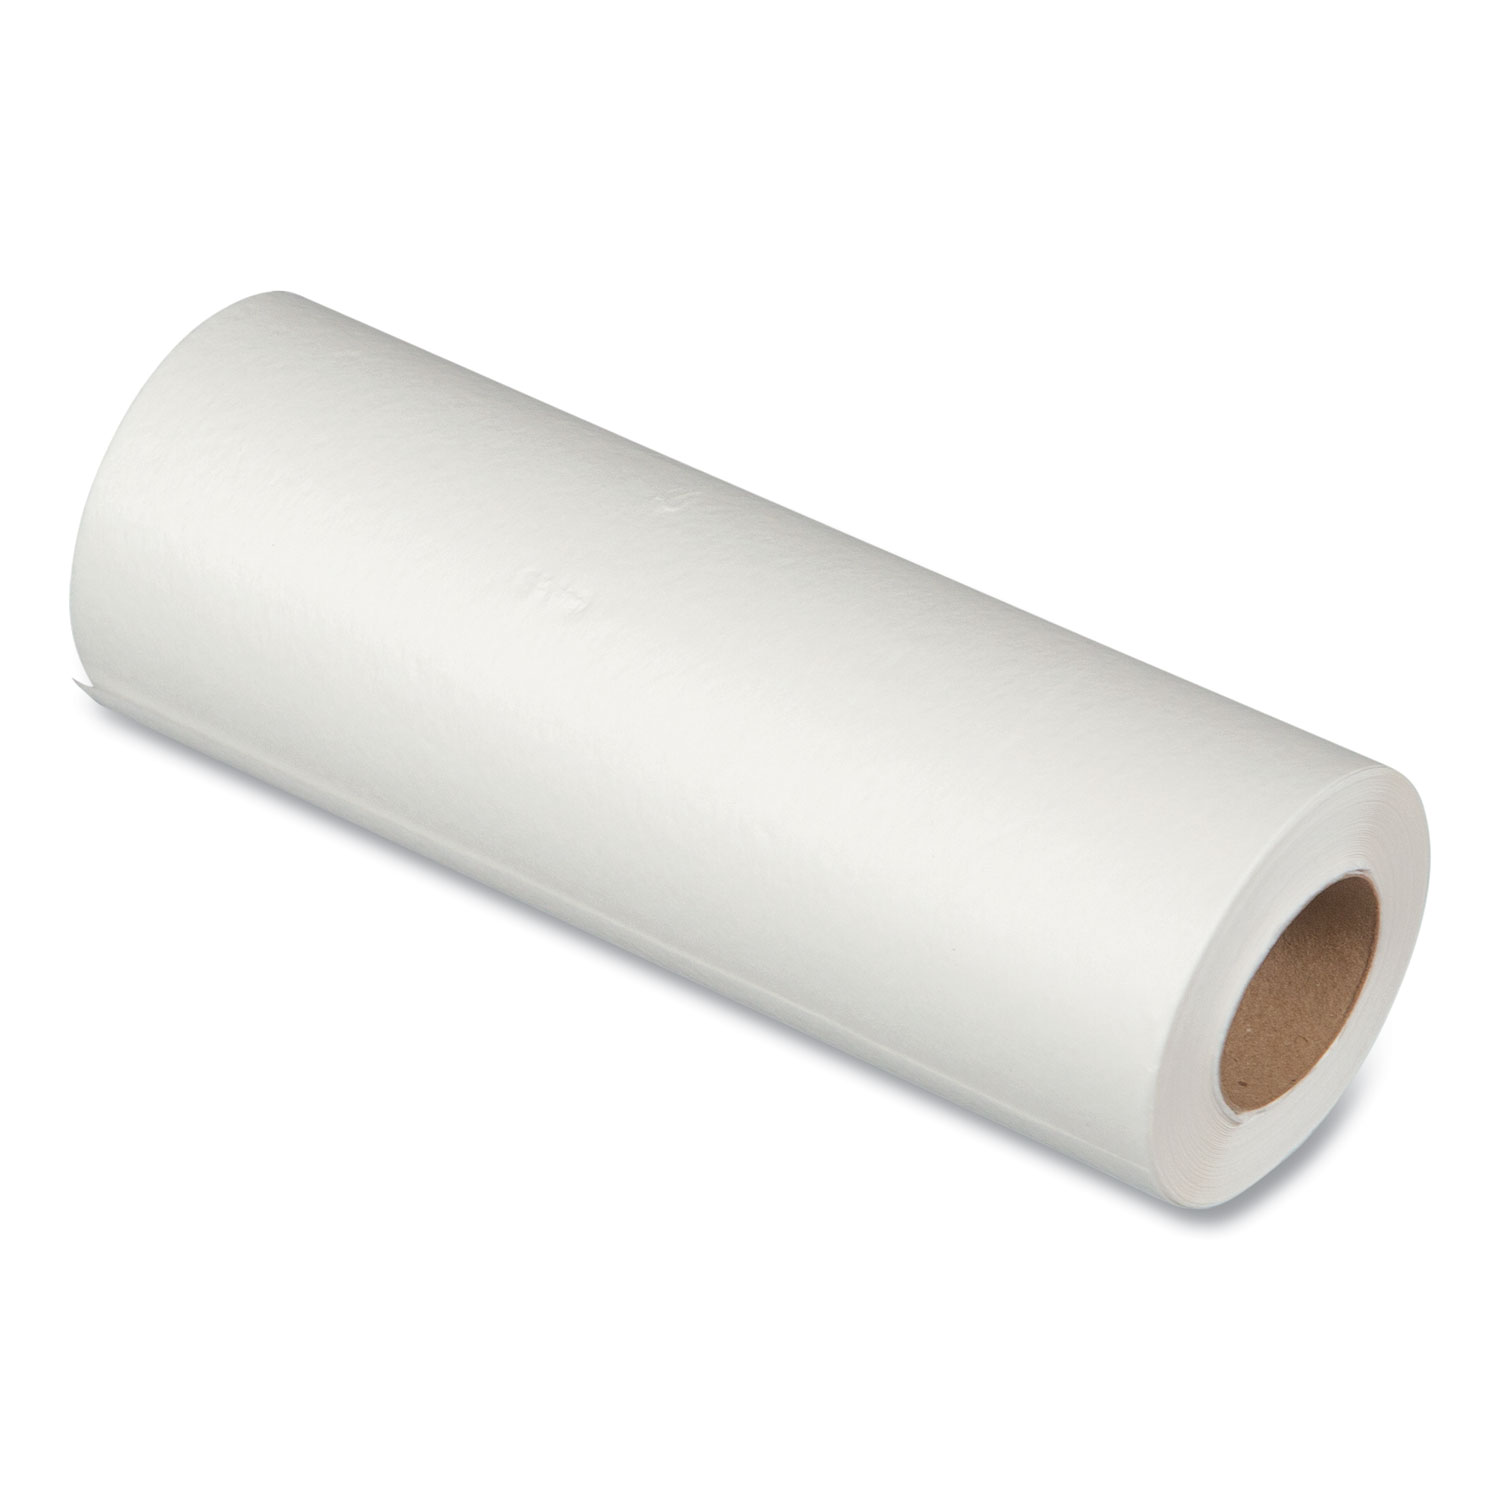 TIDI® Everyday Headrest Paper Roll, Smooth-Finish, 8.5 x 225 ft, White, 25/Carton